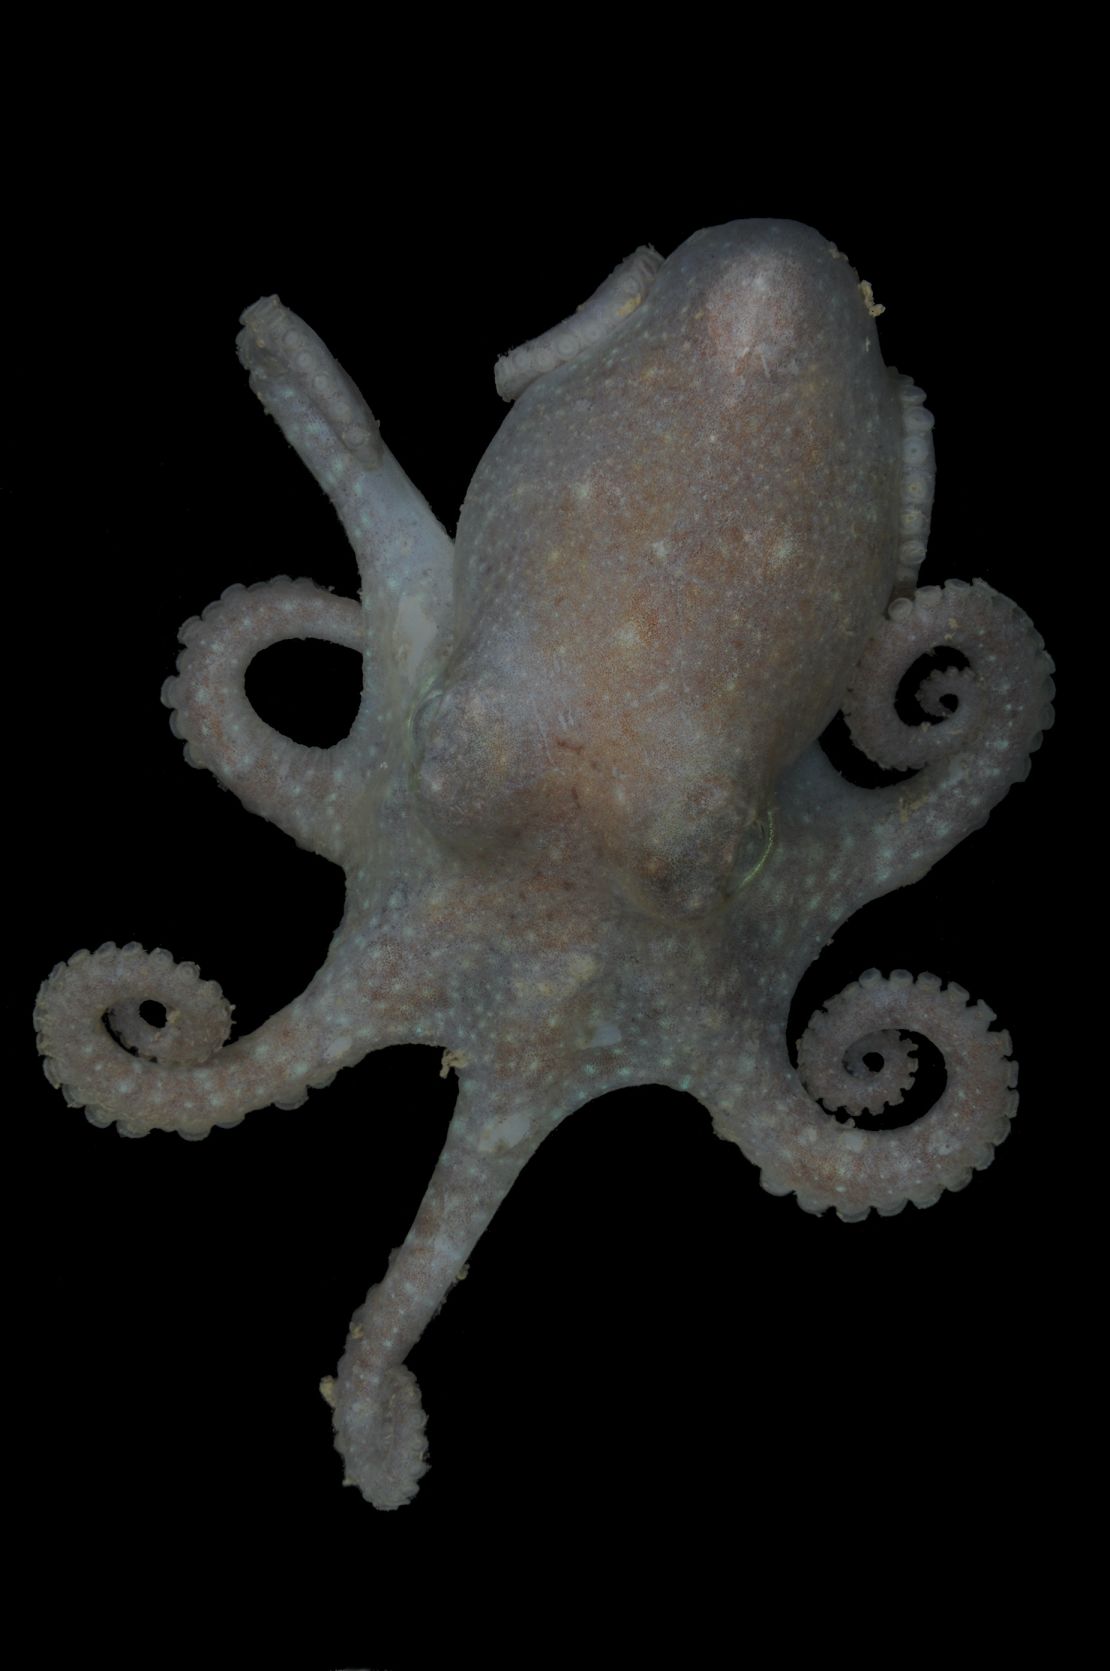 The team studied genetic information from Turquet's octopus, which is pictured above.